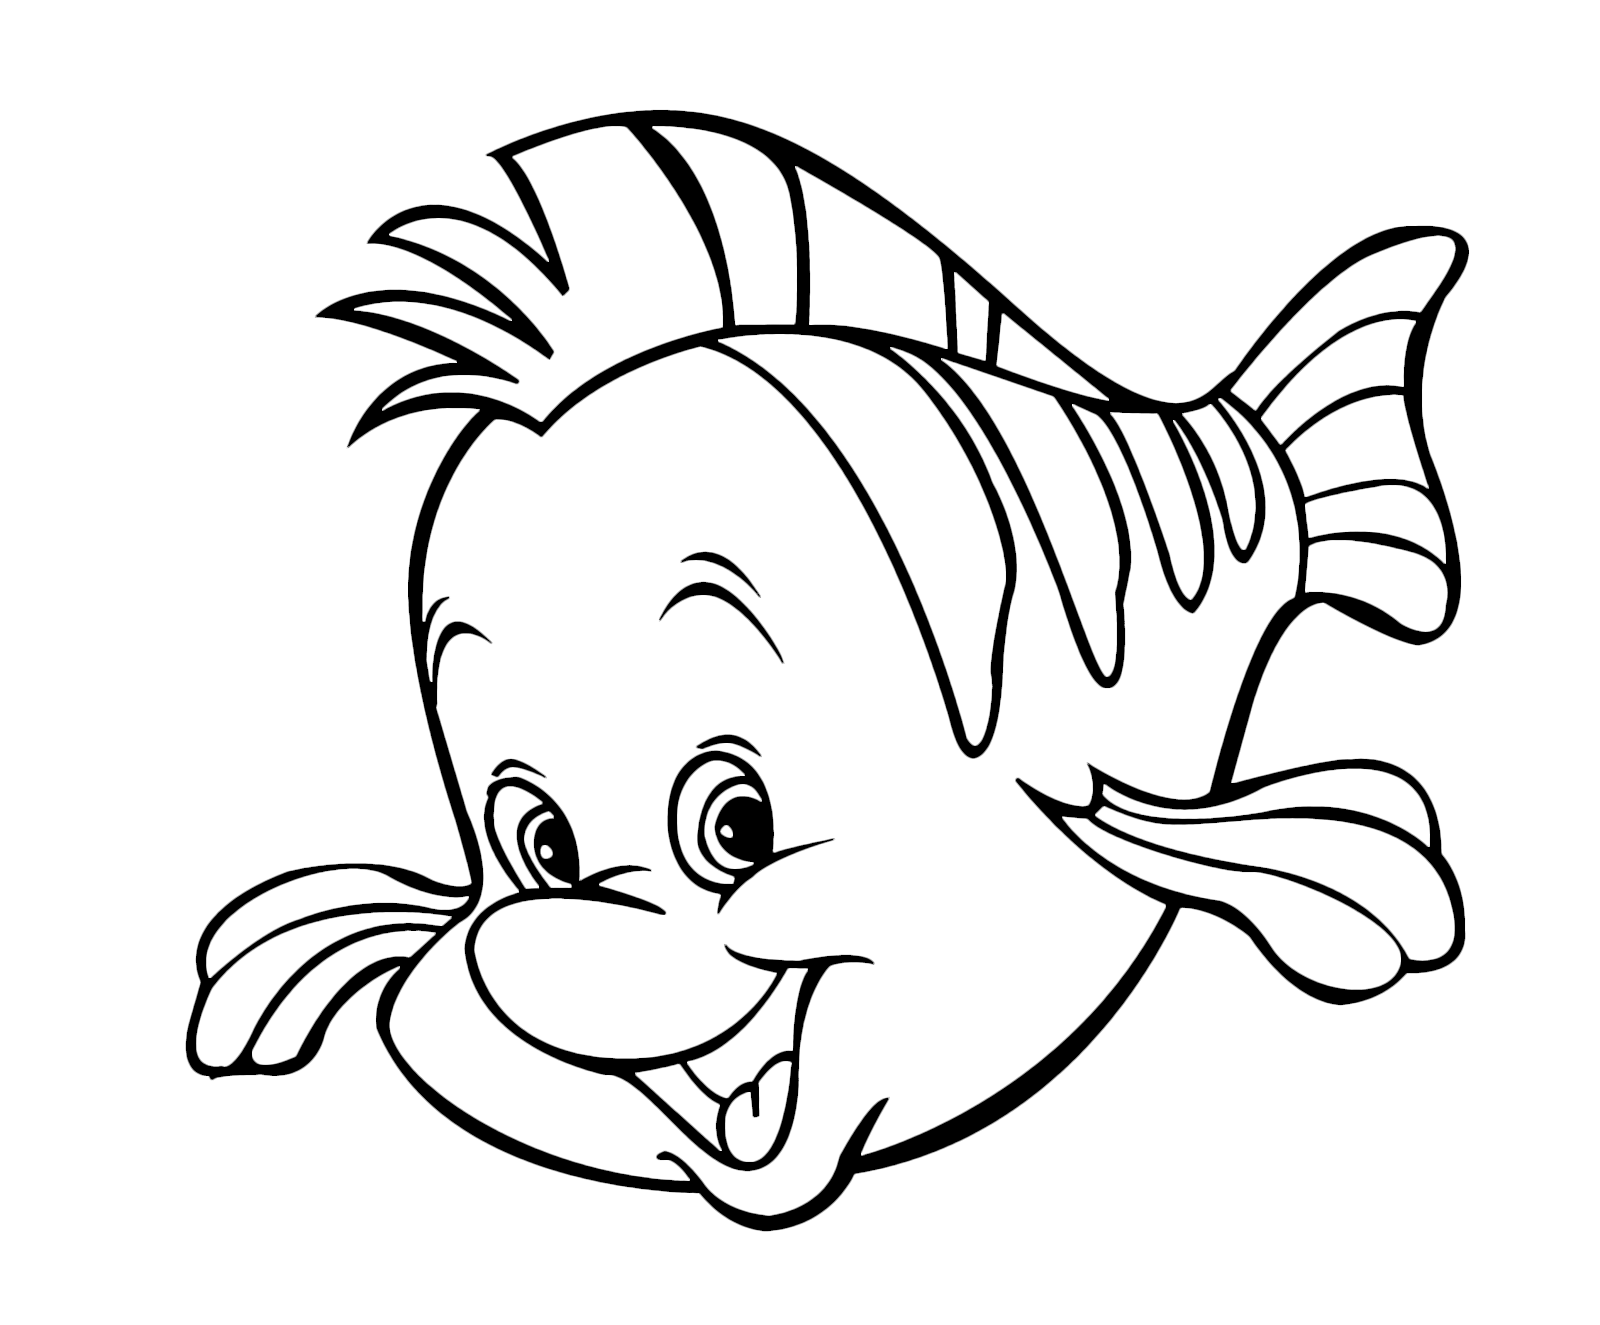 The Little Mermaid Flounder Is A Bright Yellow And Blue Colored